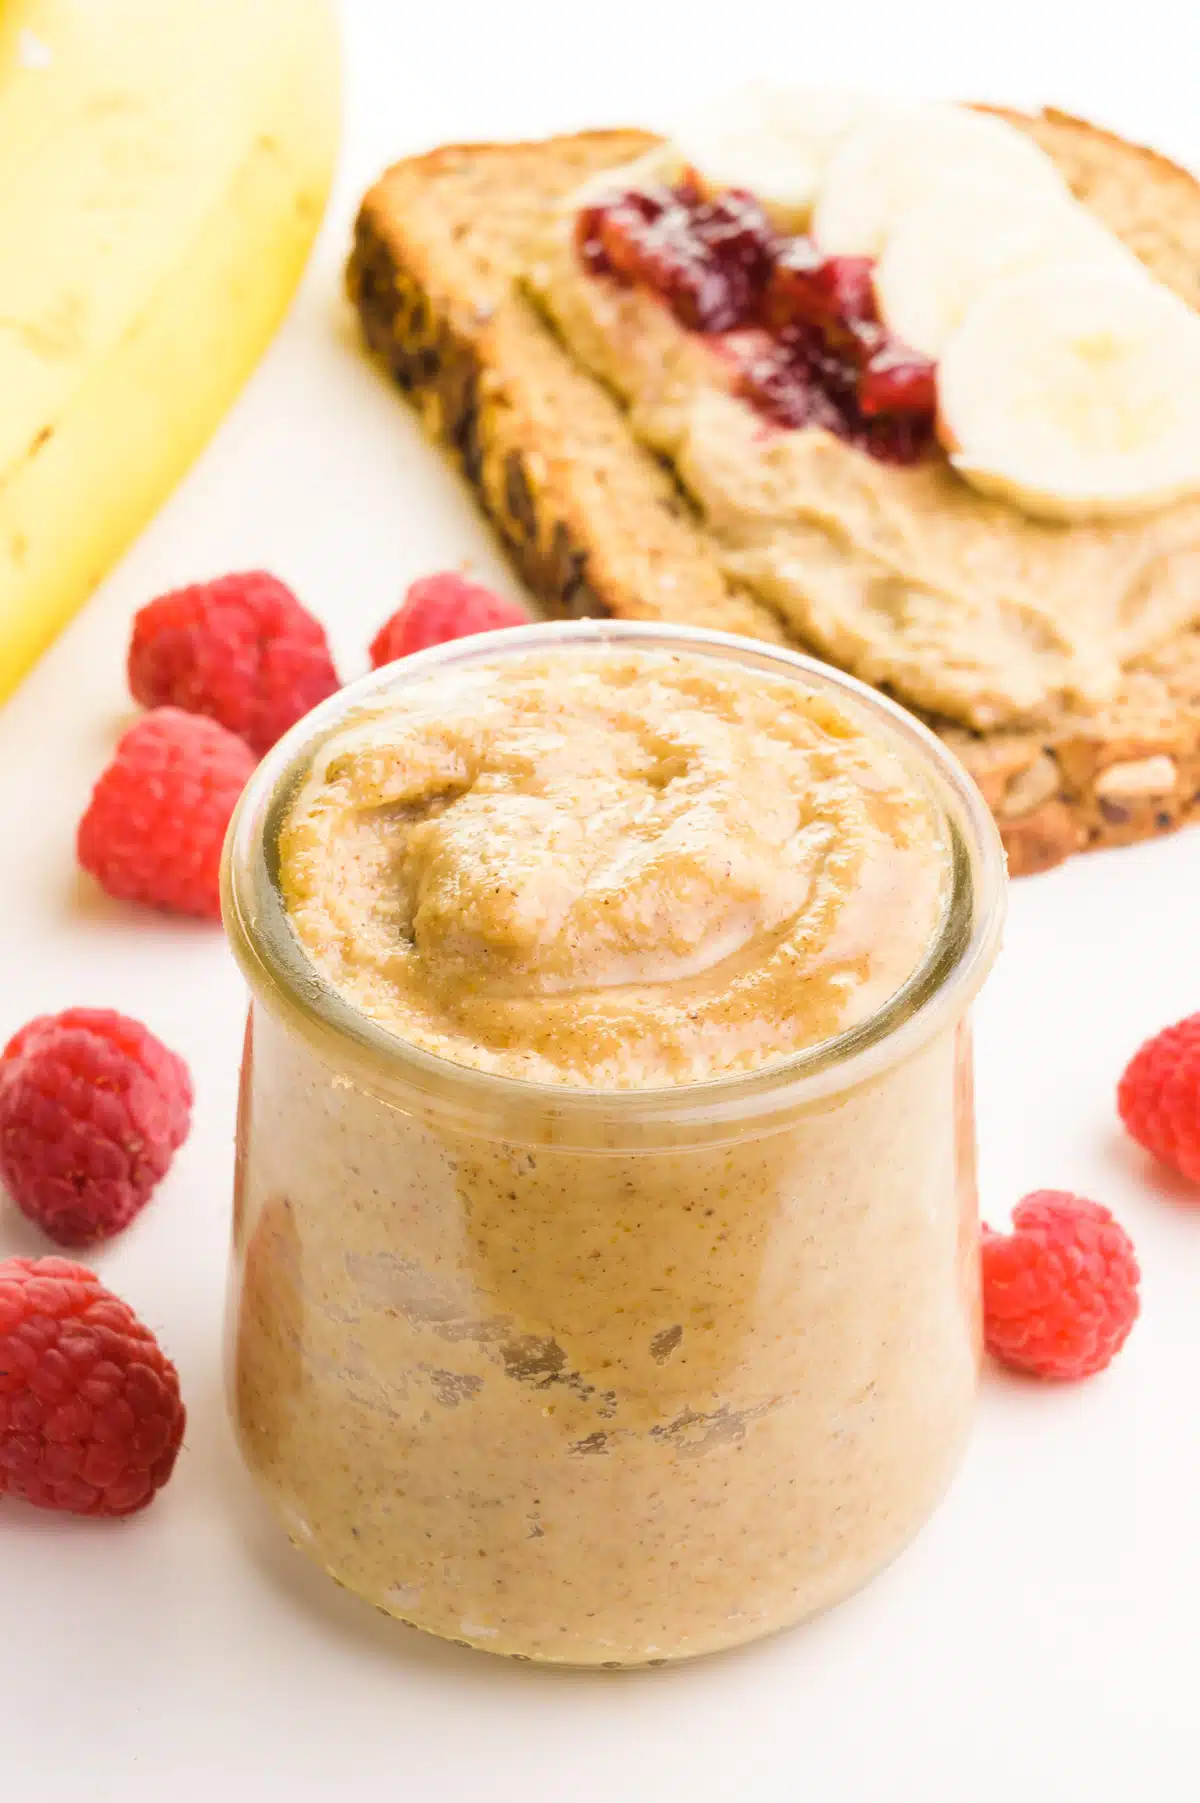 A small jar of tigernut butter has raspberries and a banana around it. There is a piece of toast with banana slices and jelly in the background.